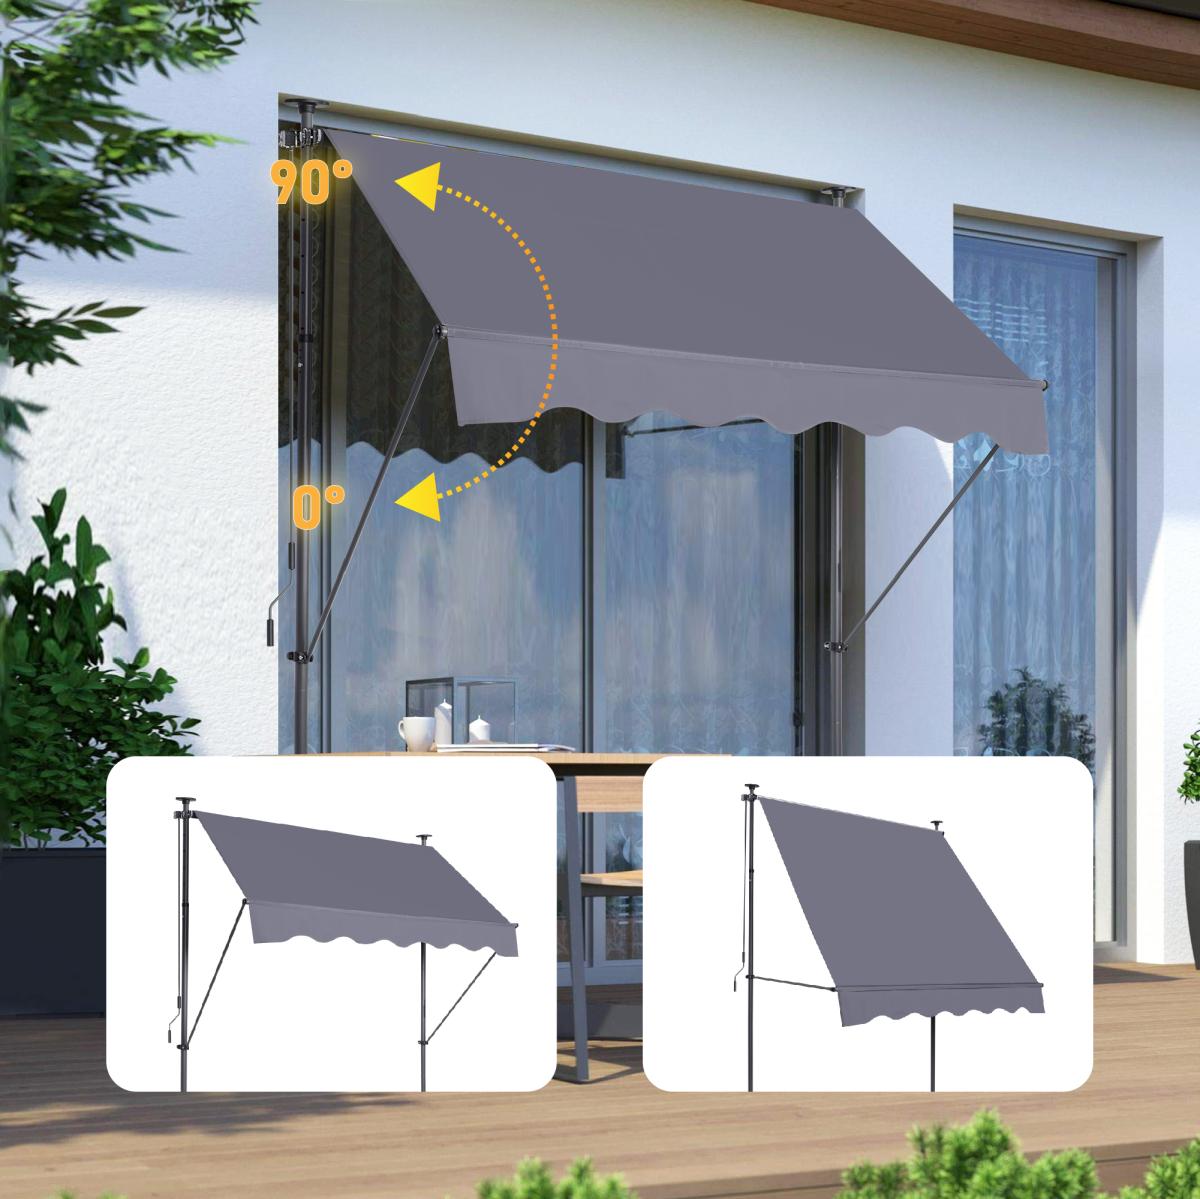 Manual Retractable Awning-78'' Non-Screw Outdoor Sun Shade Cover with Uv Protection – 100% Polyester Made Outdoor Canopy Adjustable Patio Door Window Awning Canopy Sun Shade Curtain for Backyard,Gary